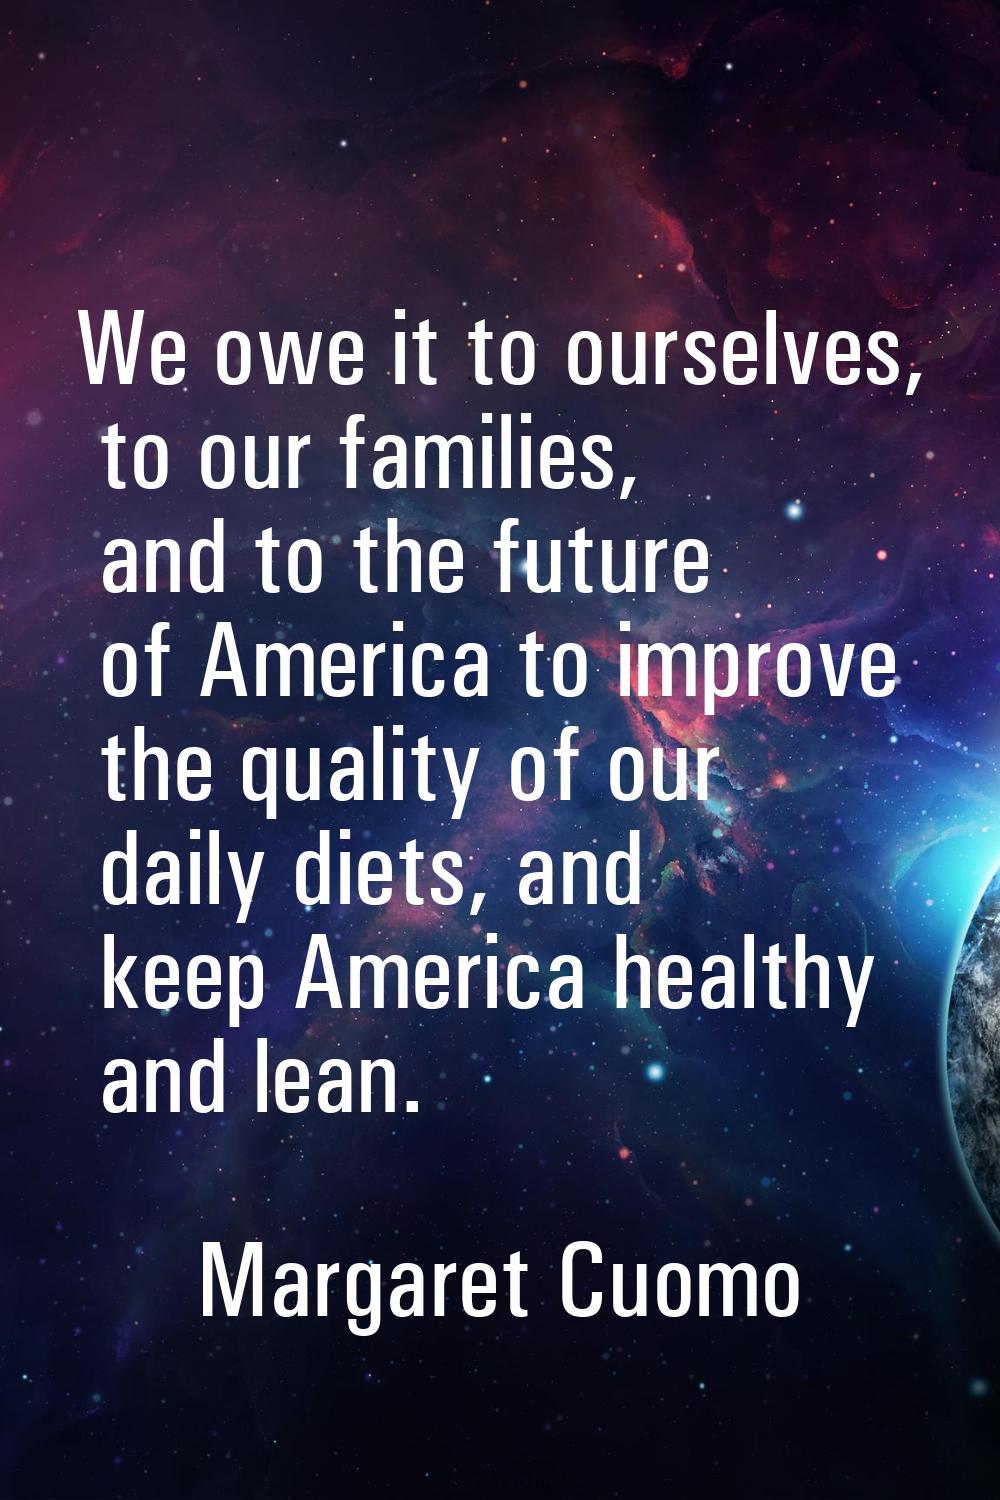 We owe it to ourselves, to our families, and to the future of America to improve the quality of our